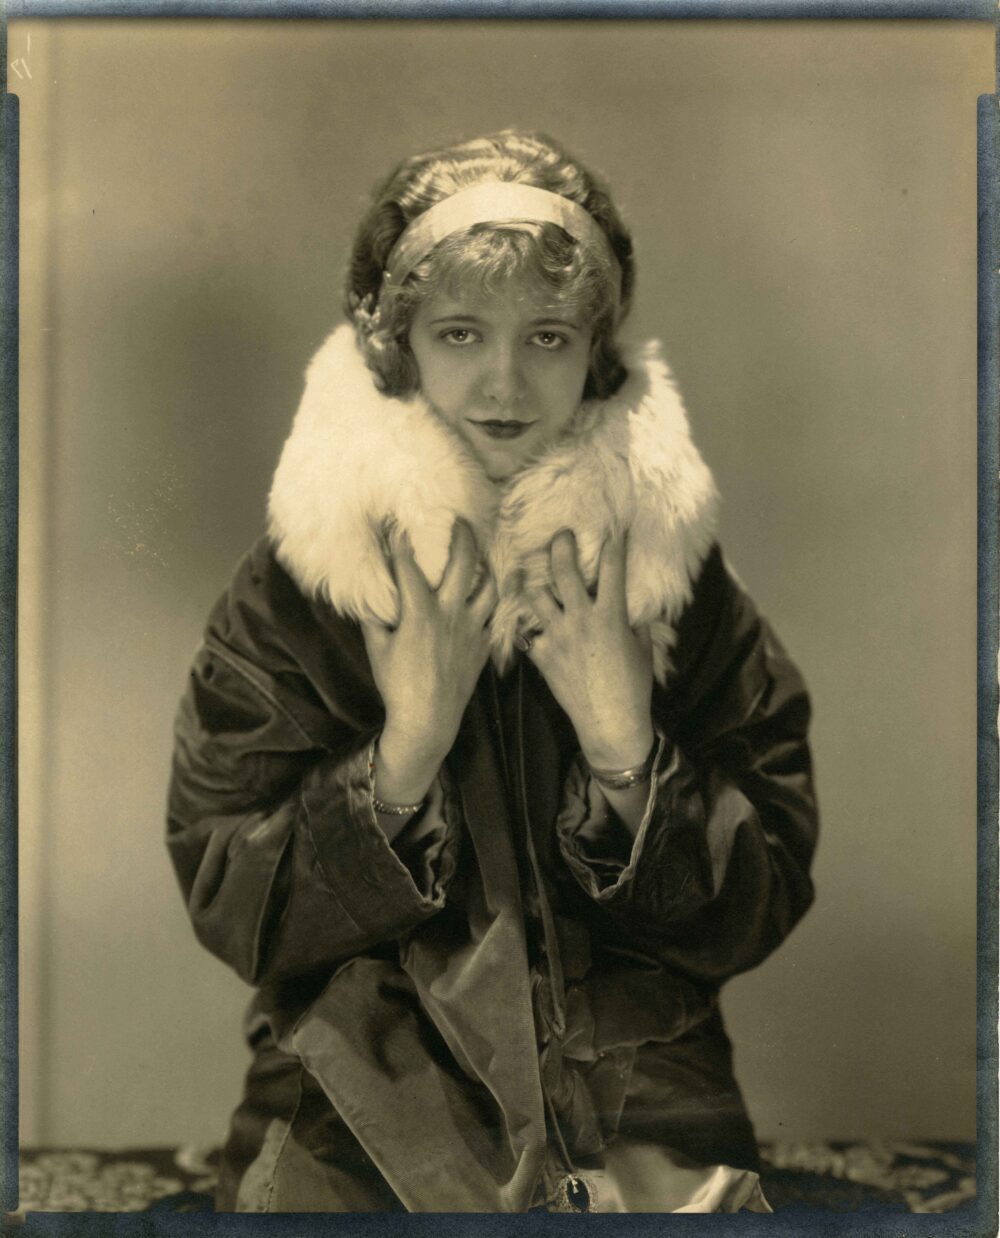 Portrait of a woman wearing a coat with fur neckline